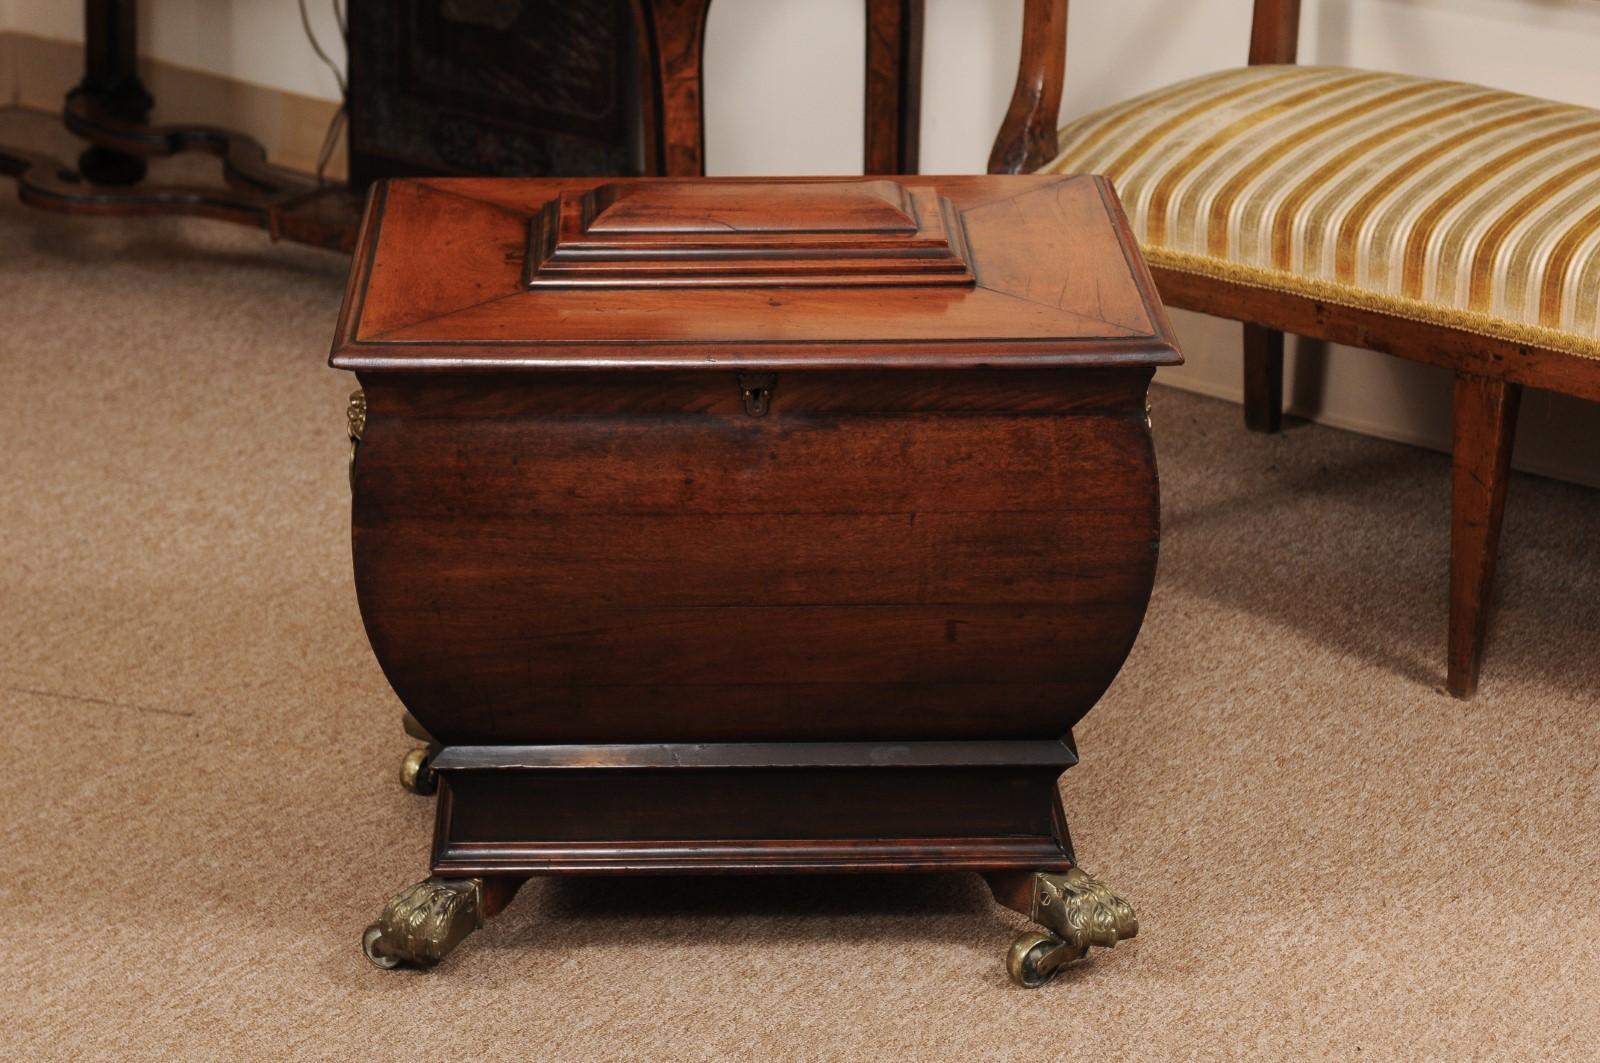 English Regency Mahogany Cellarette with Brass Paw Feet, Early 19th Century For Sale 9